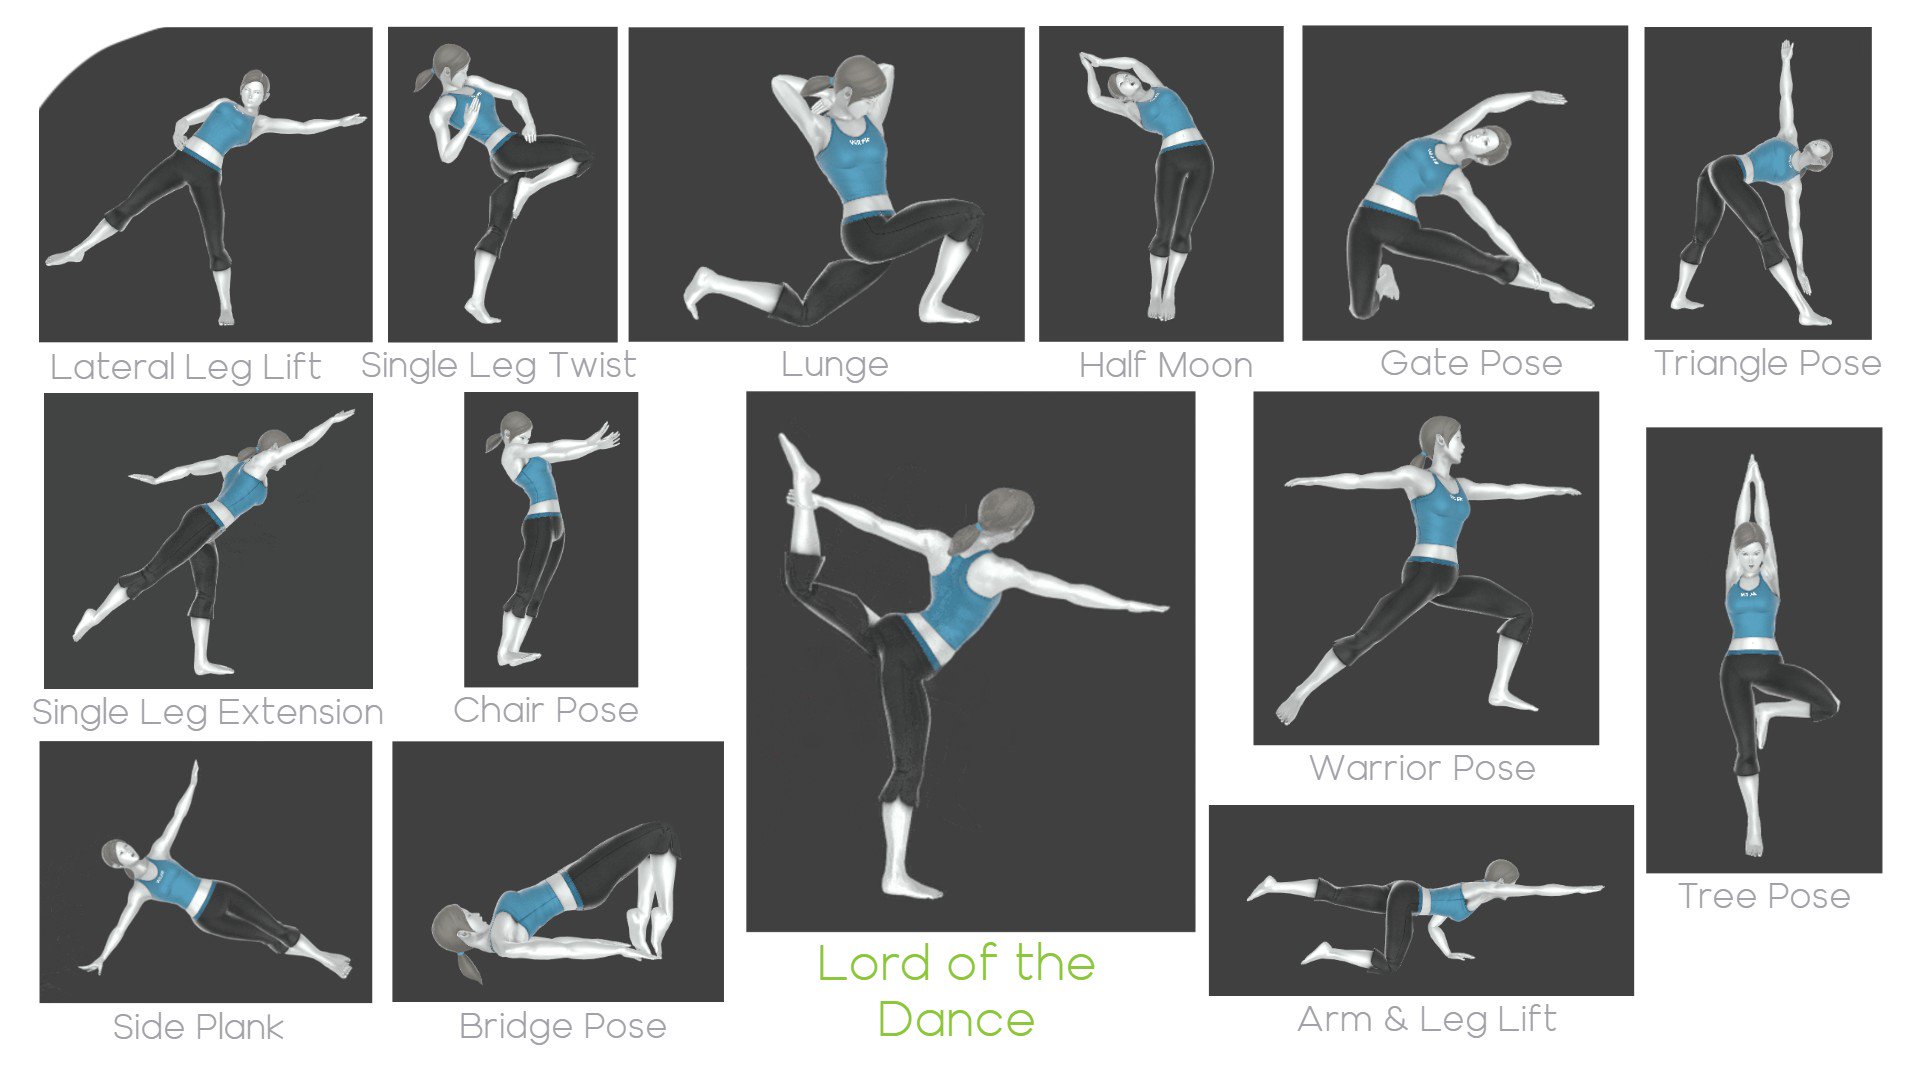 som pindas Versnel Jay on Twitter: "I made this infographic on Wii Fit Trainers exercises and yoga  poses. 🧘‍♀️ Her ftilt is a pose called LORD OF THE DANCE. Smash  commentators, use any of these